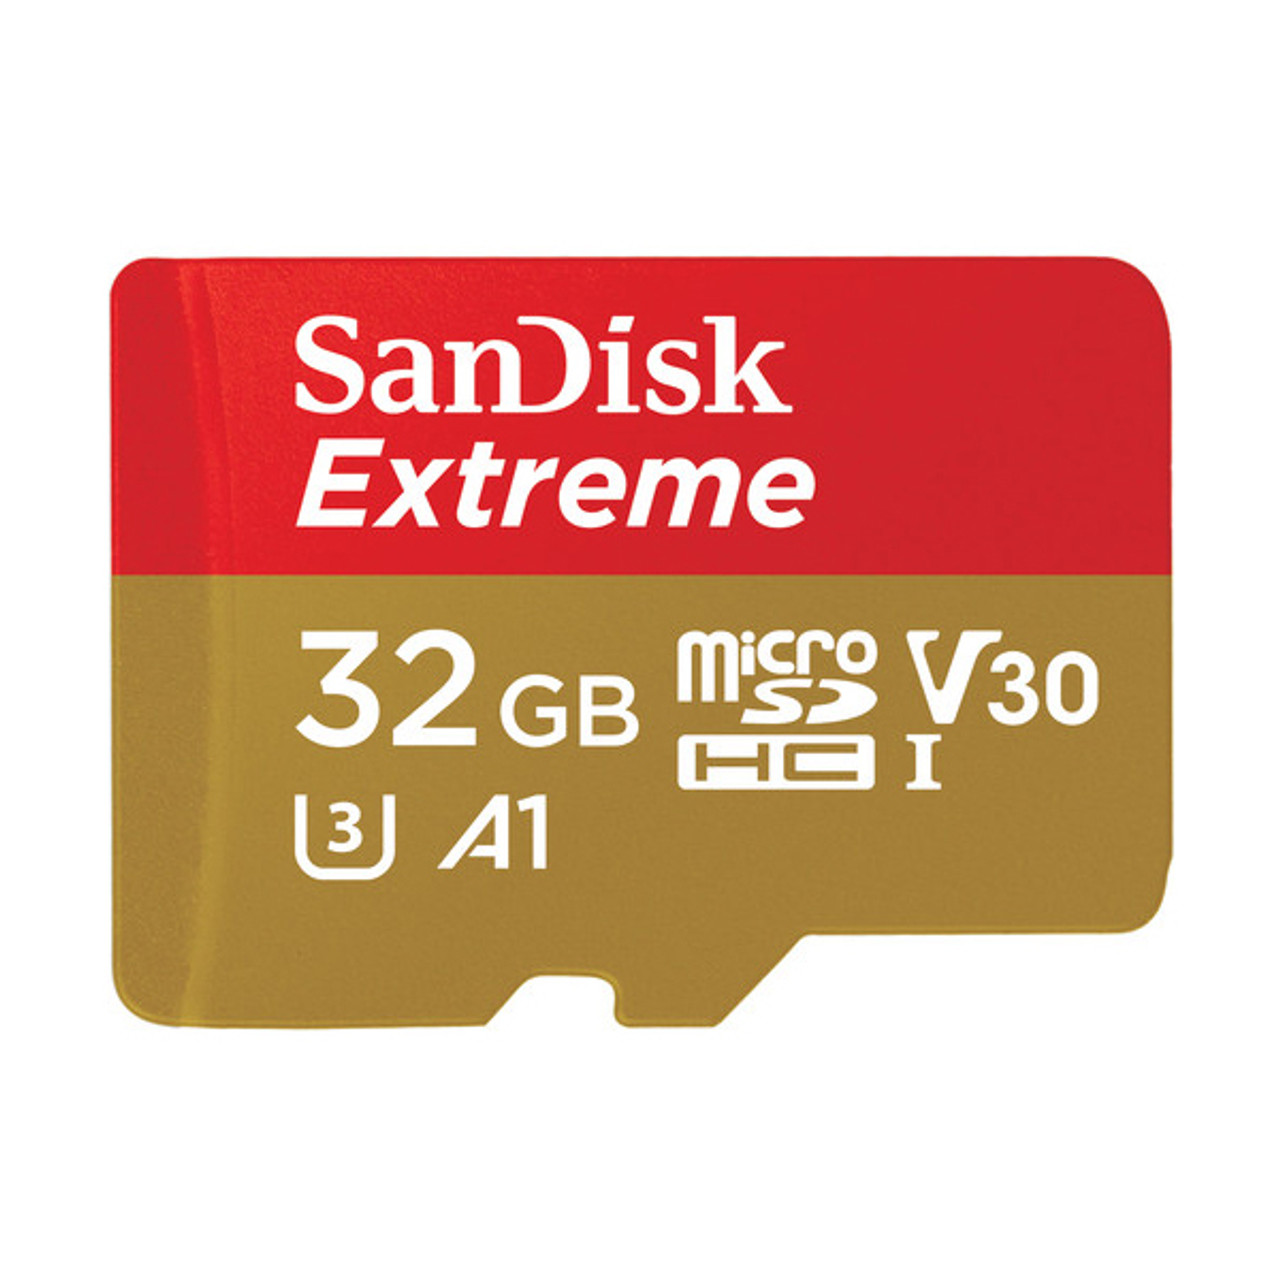 Sandisk Extreme 32GB Micro 100MB/s UHS-I SDXC Card